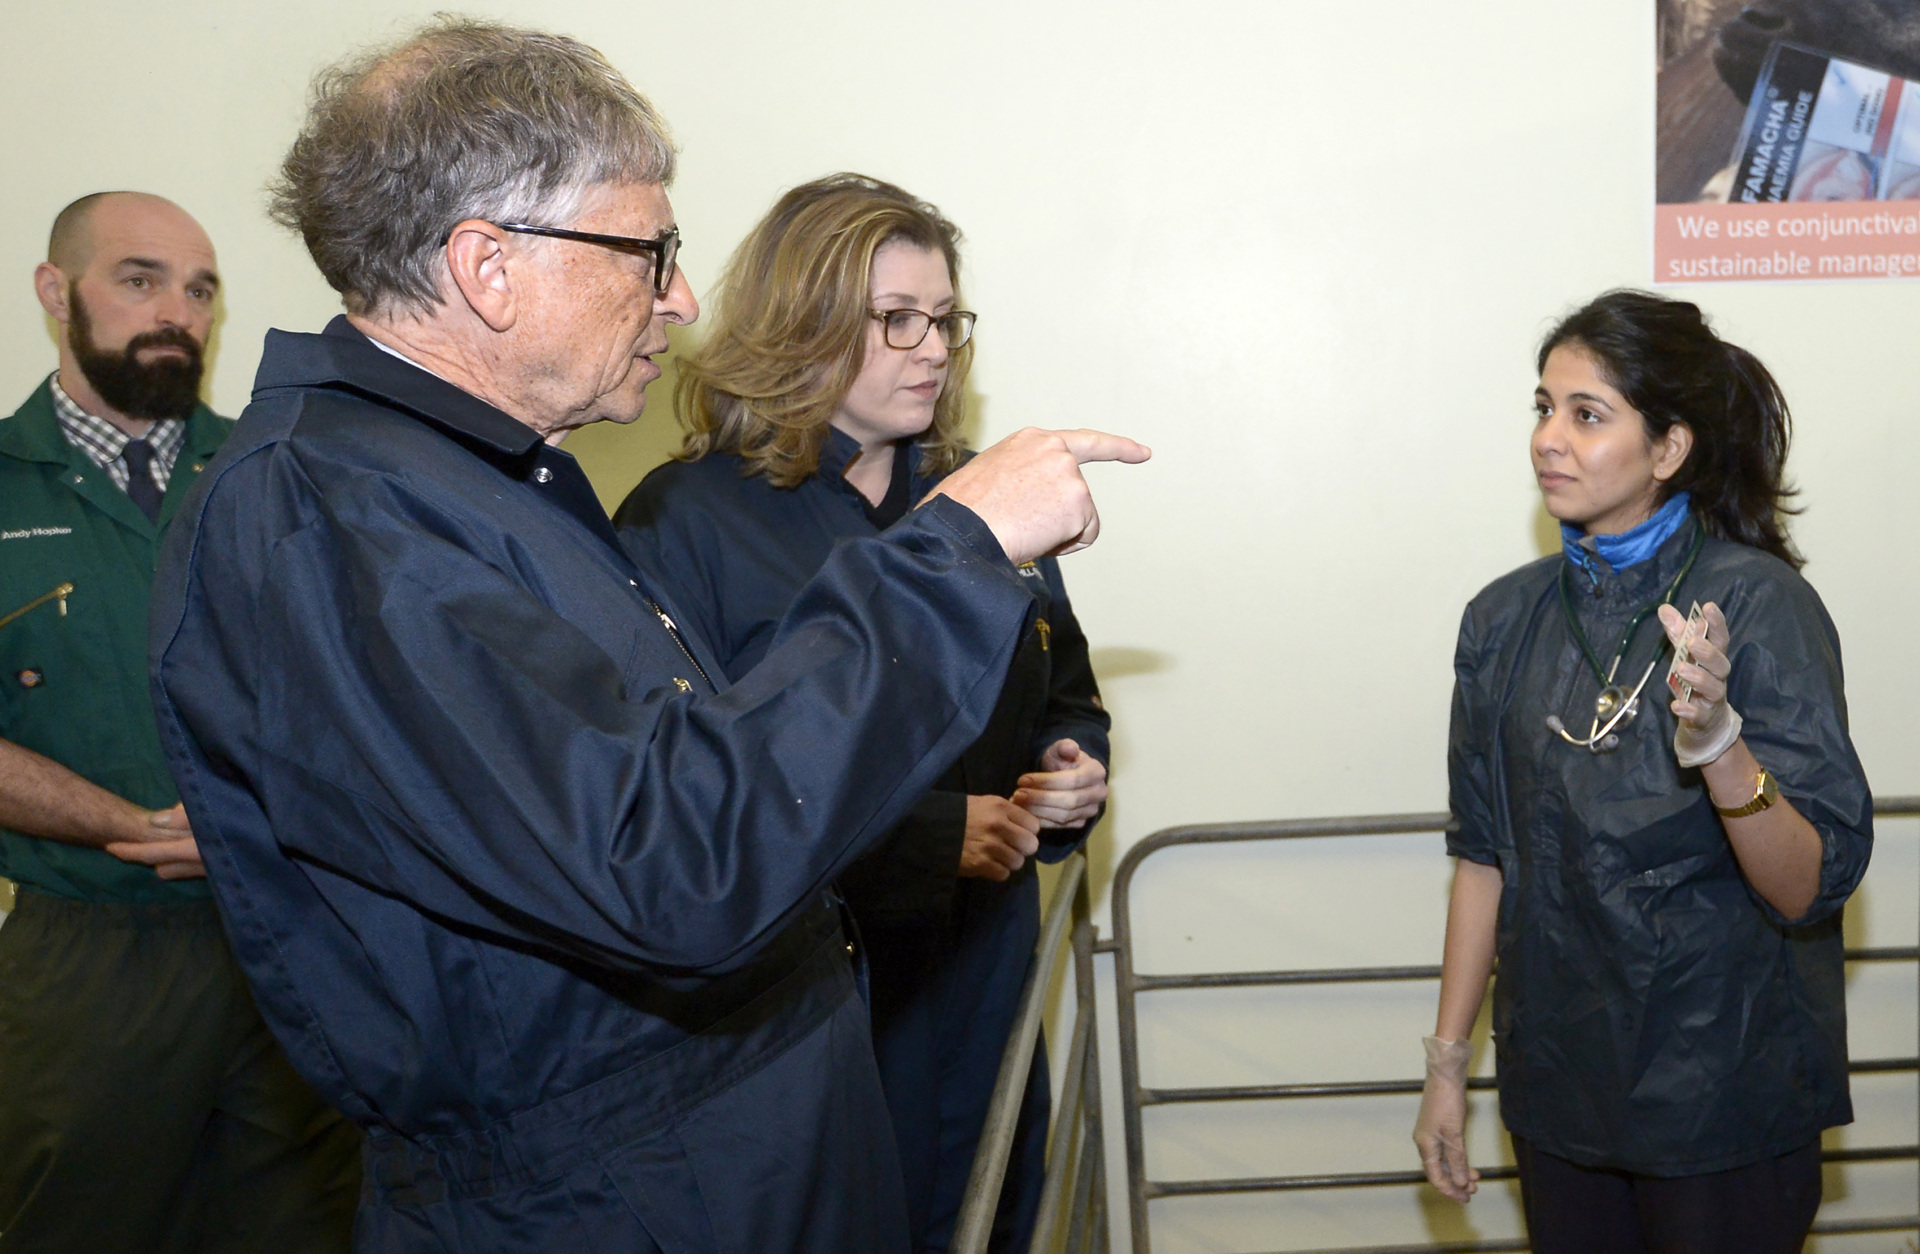 US entrepeneur and co-founder of the Microsoft Corporation, Bill Gates (2L) and Britain's International Development Secretary Penny Mordaunt (3L) meet vet Andy Hopker (L) and student Vanya Lalljee during an event to launch the Global Academy of Agriculture and Food Security at the University of Edinburgh, Scotland on January 26, 2018. / AFP PHOTO / POOL / Neil Hanna (Photo credit should read NEIL HANNA/AFP via Getty Images)